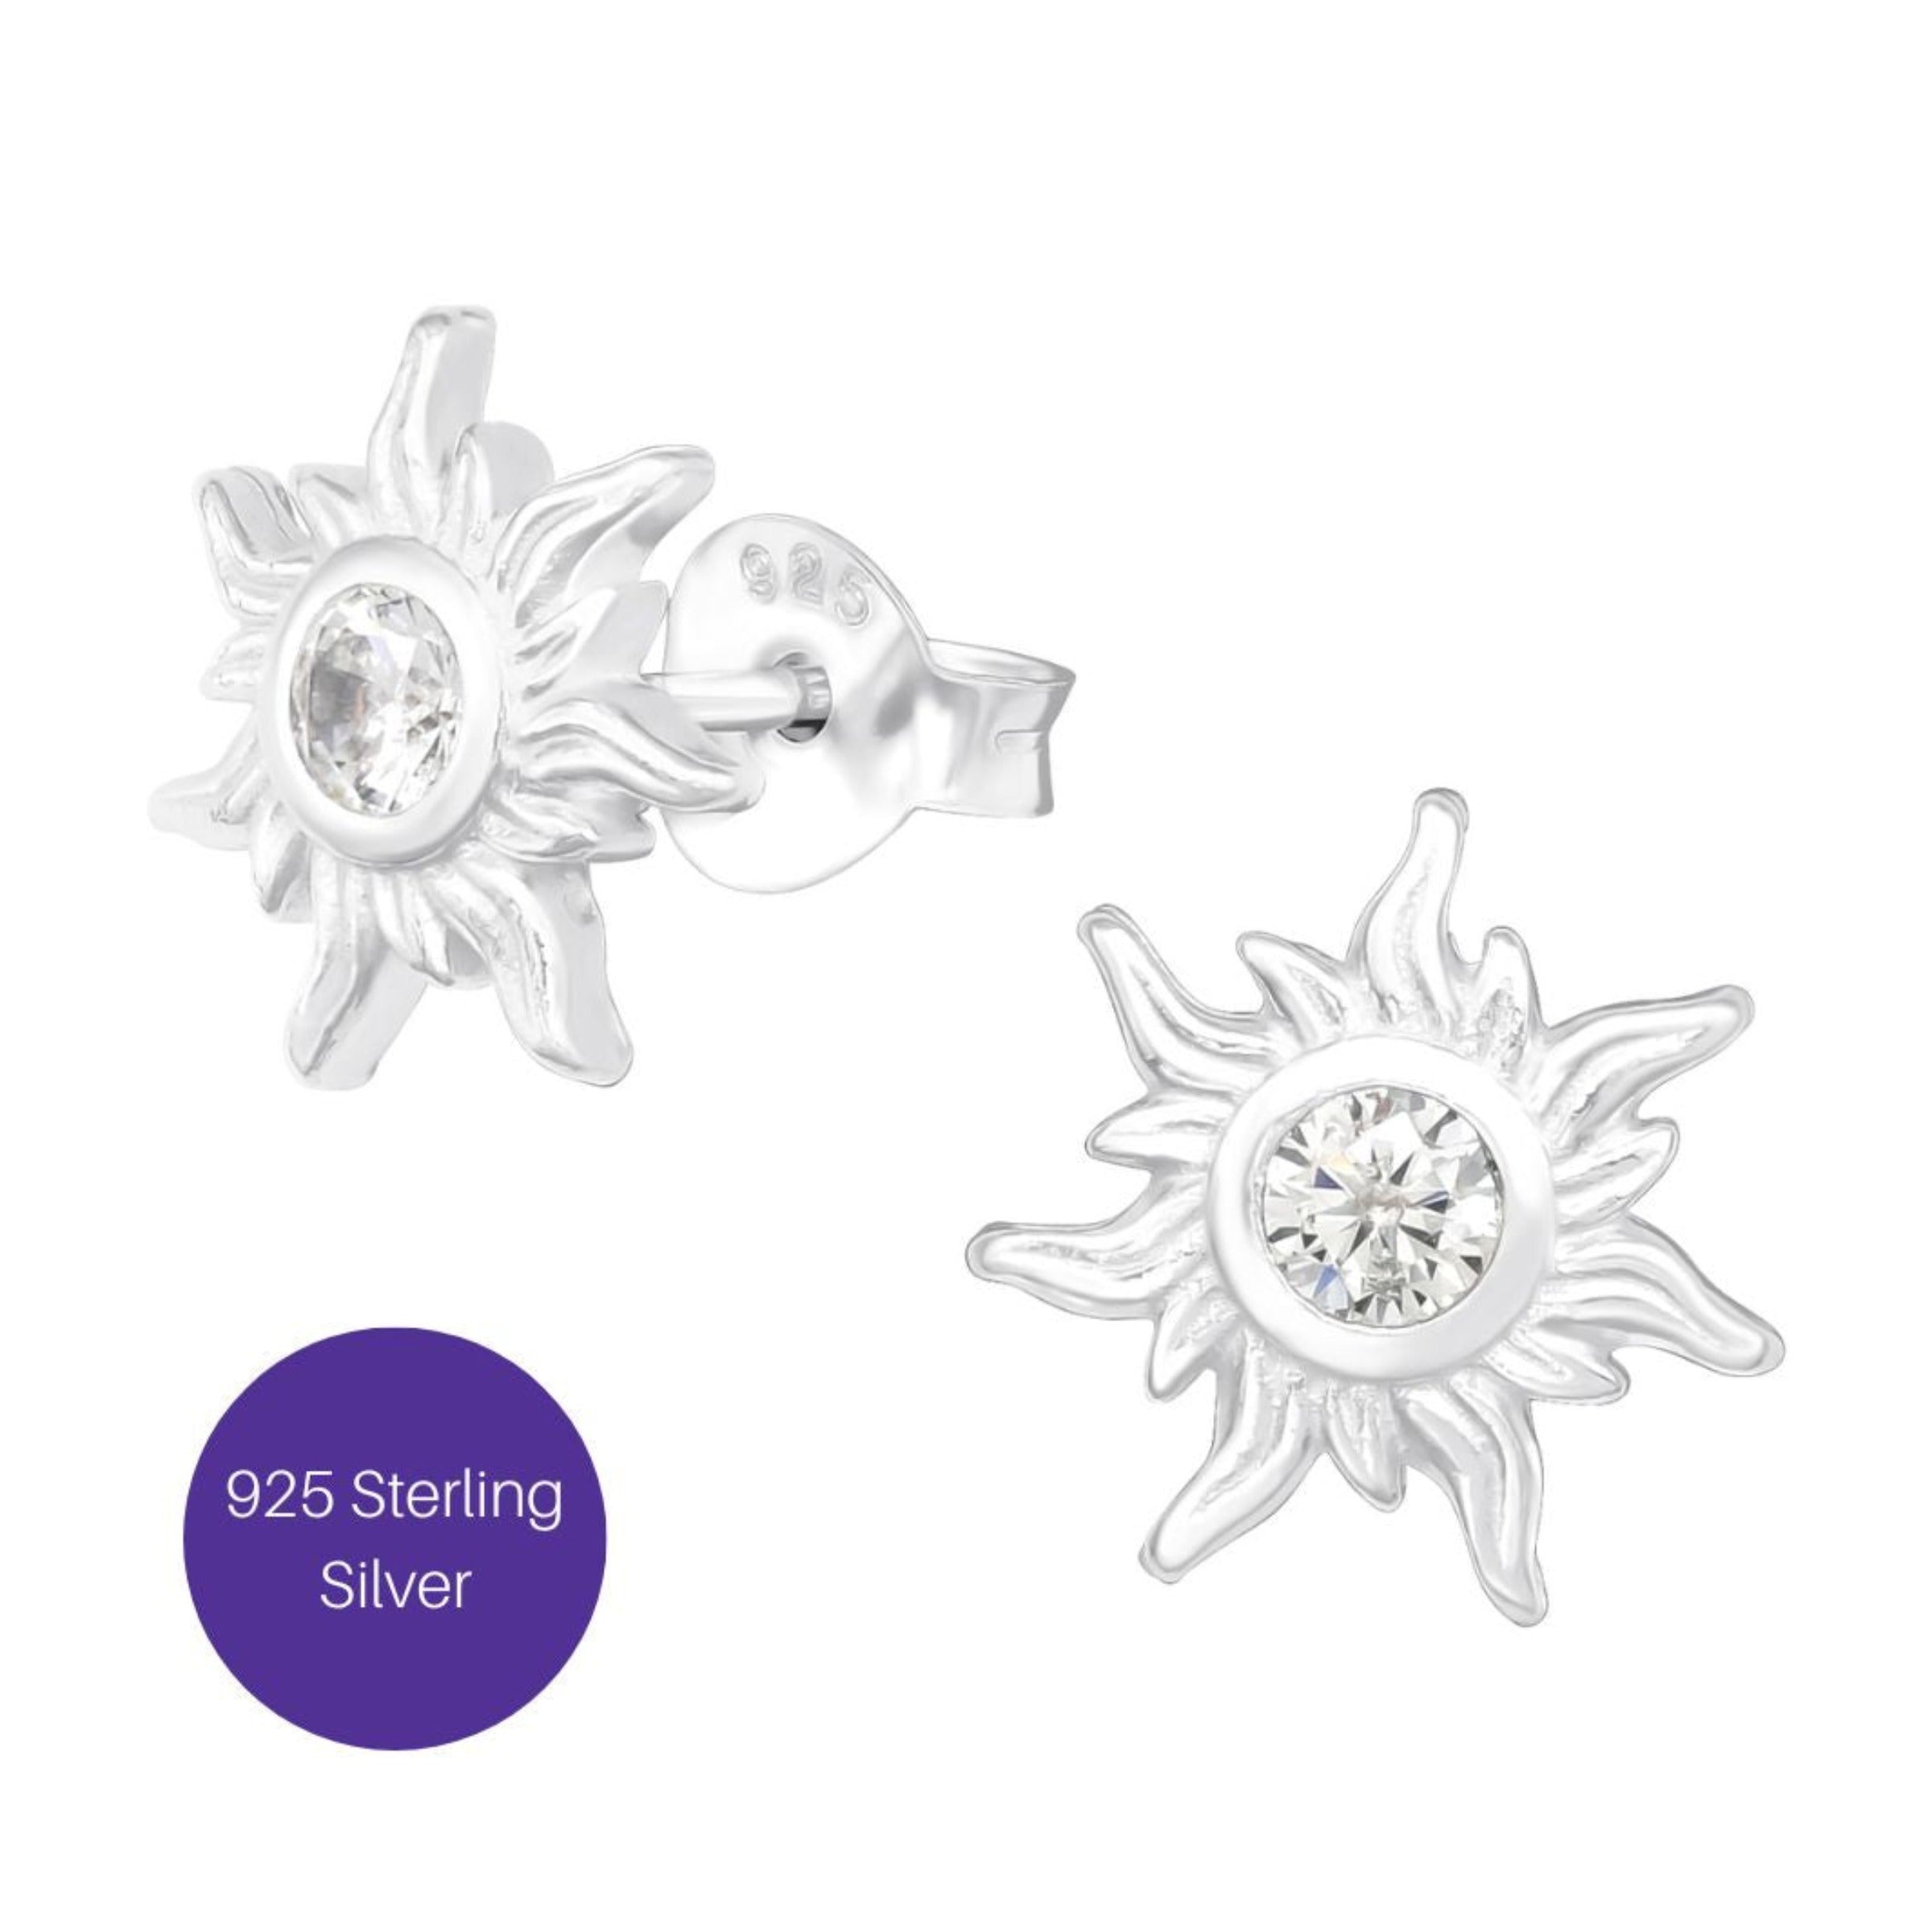 Protective Sun Stud Earrings Besom Boutique